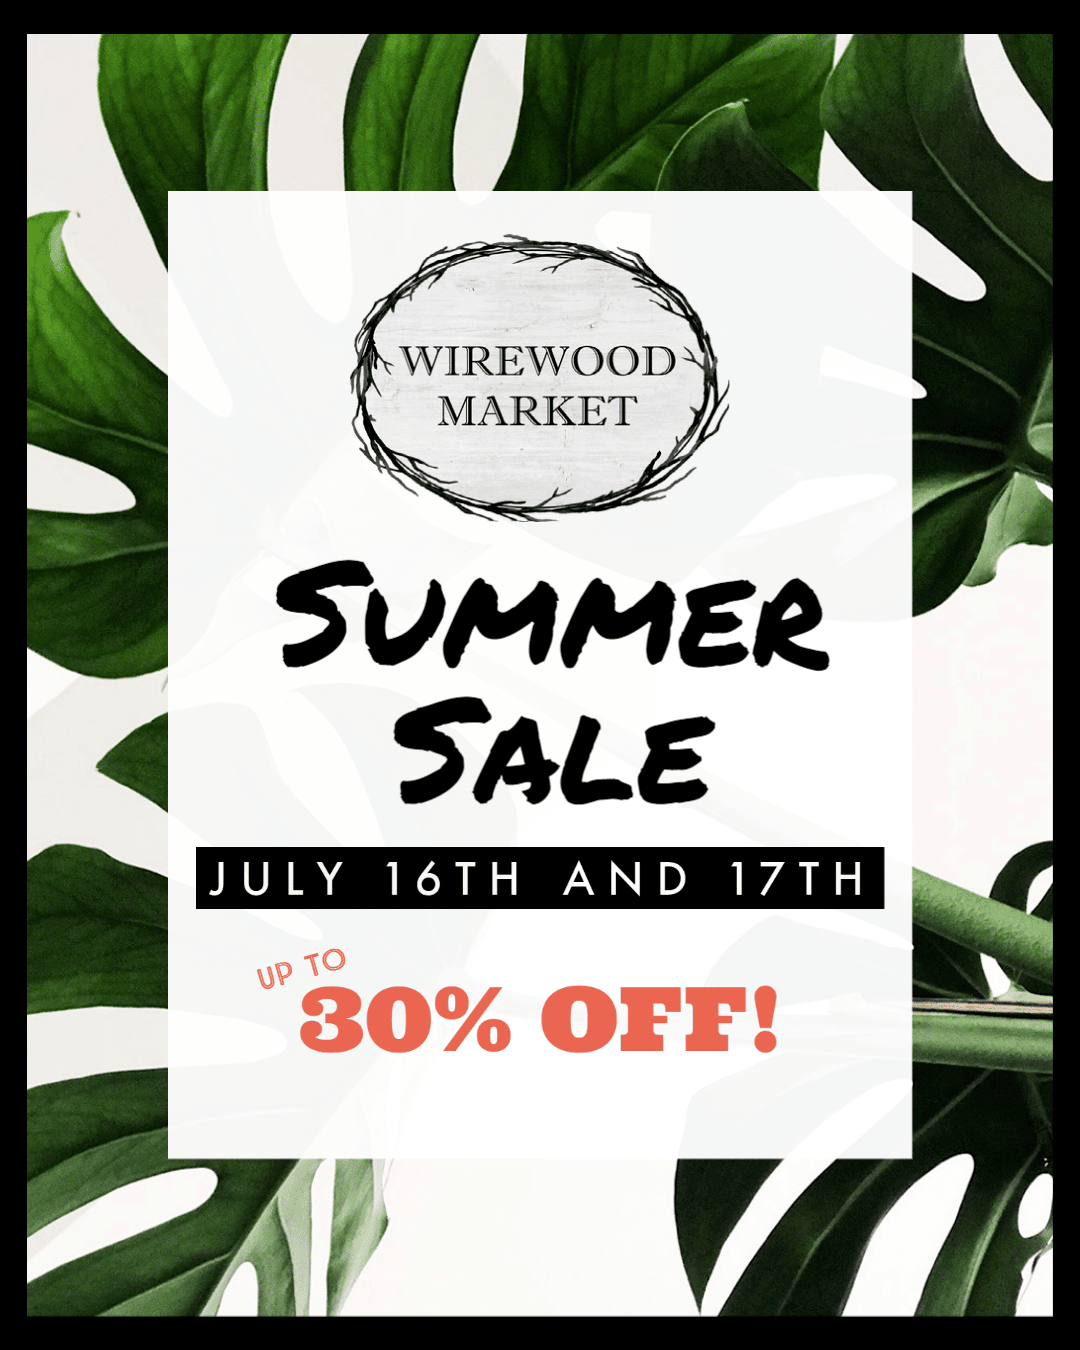 Summer Sale July 16th and 17th!